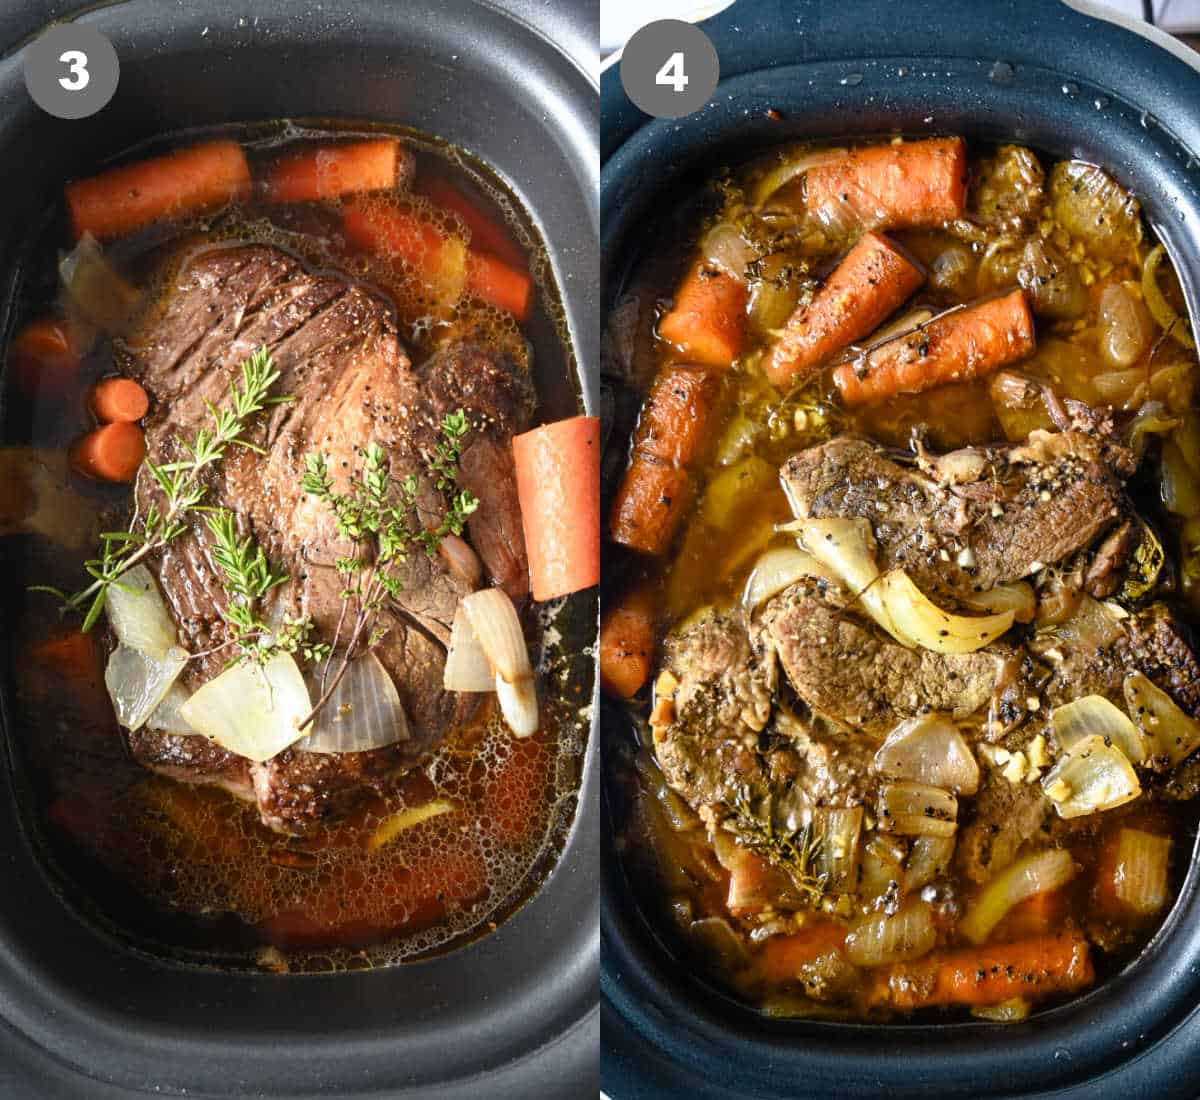 Everything placed in a slow cooker and cooked.